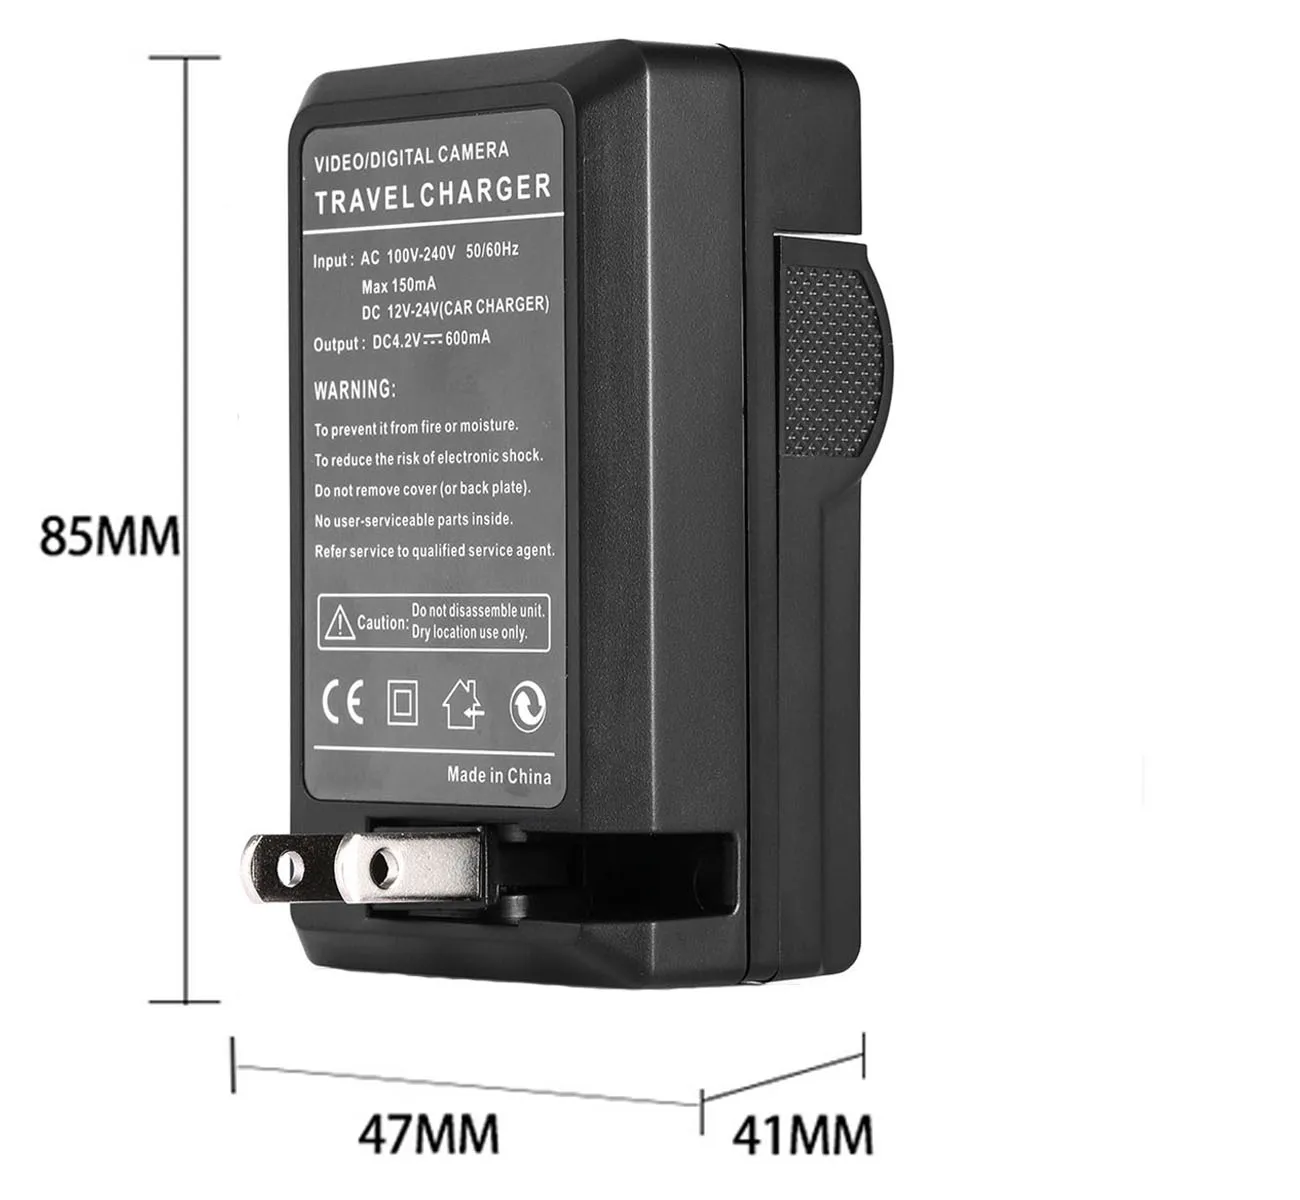 

LP-E8 Battery Charger For Canon EOS Rebel T2i, T3i, T4i, T5i and EOS 550D, EOS 600D, 650D, 700D Digital SLR Camera